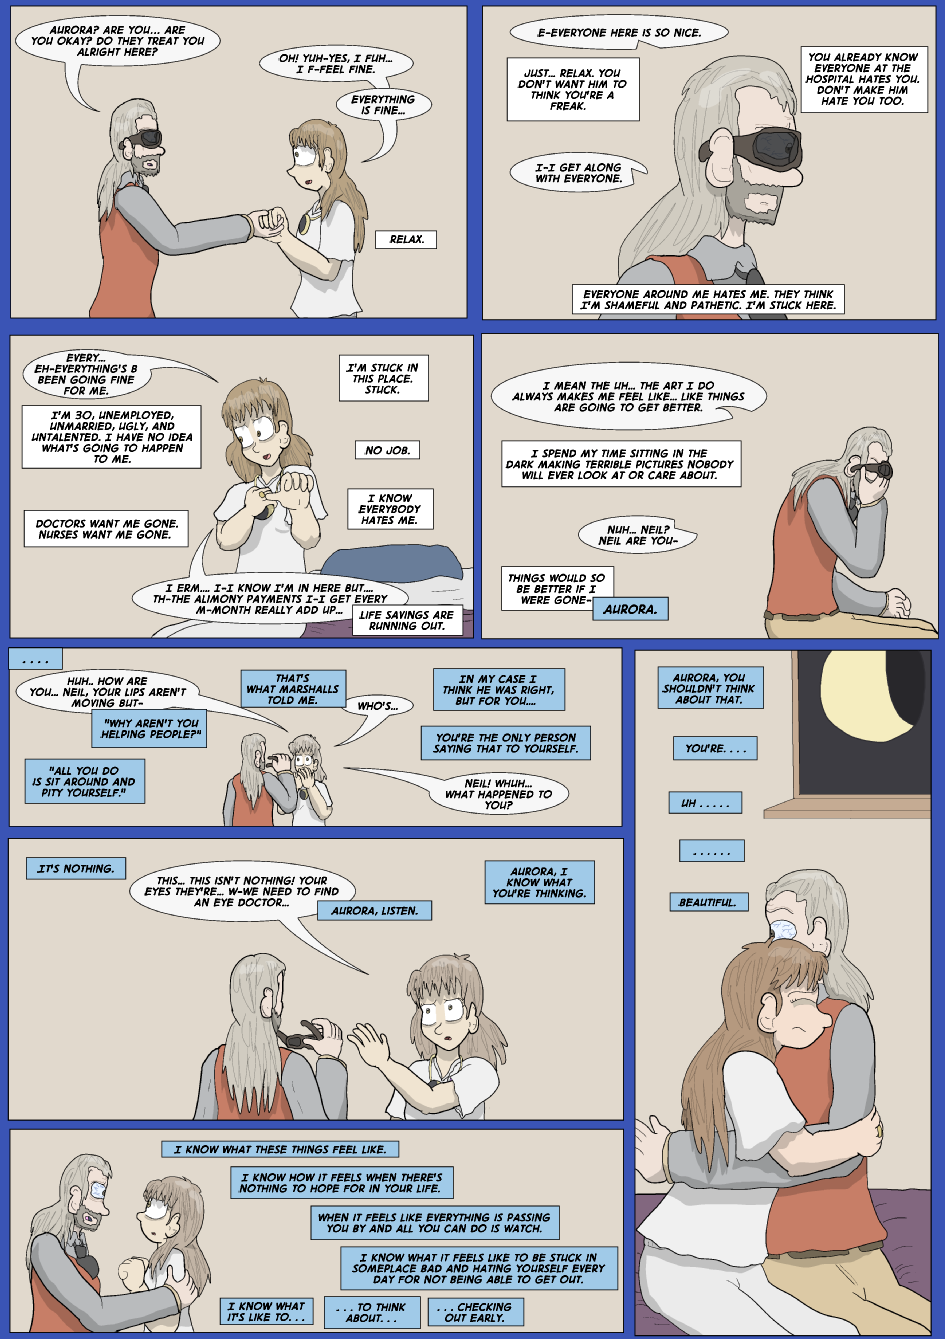 Who Blue Truly Are- Page 44